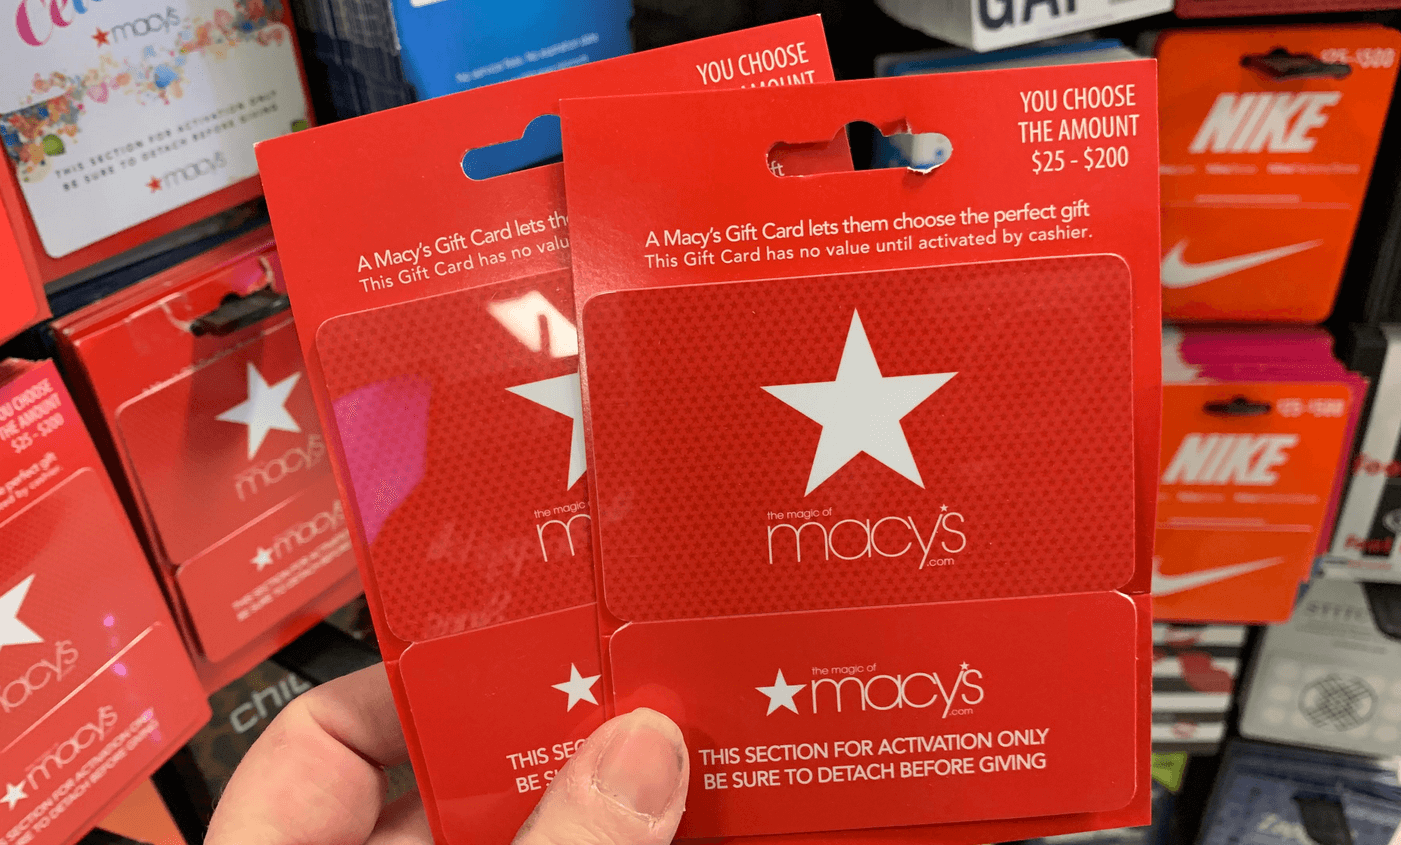 How To Redeem Macy's Gift Card | Use Macy's Gift Card 2022 - YouTube